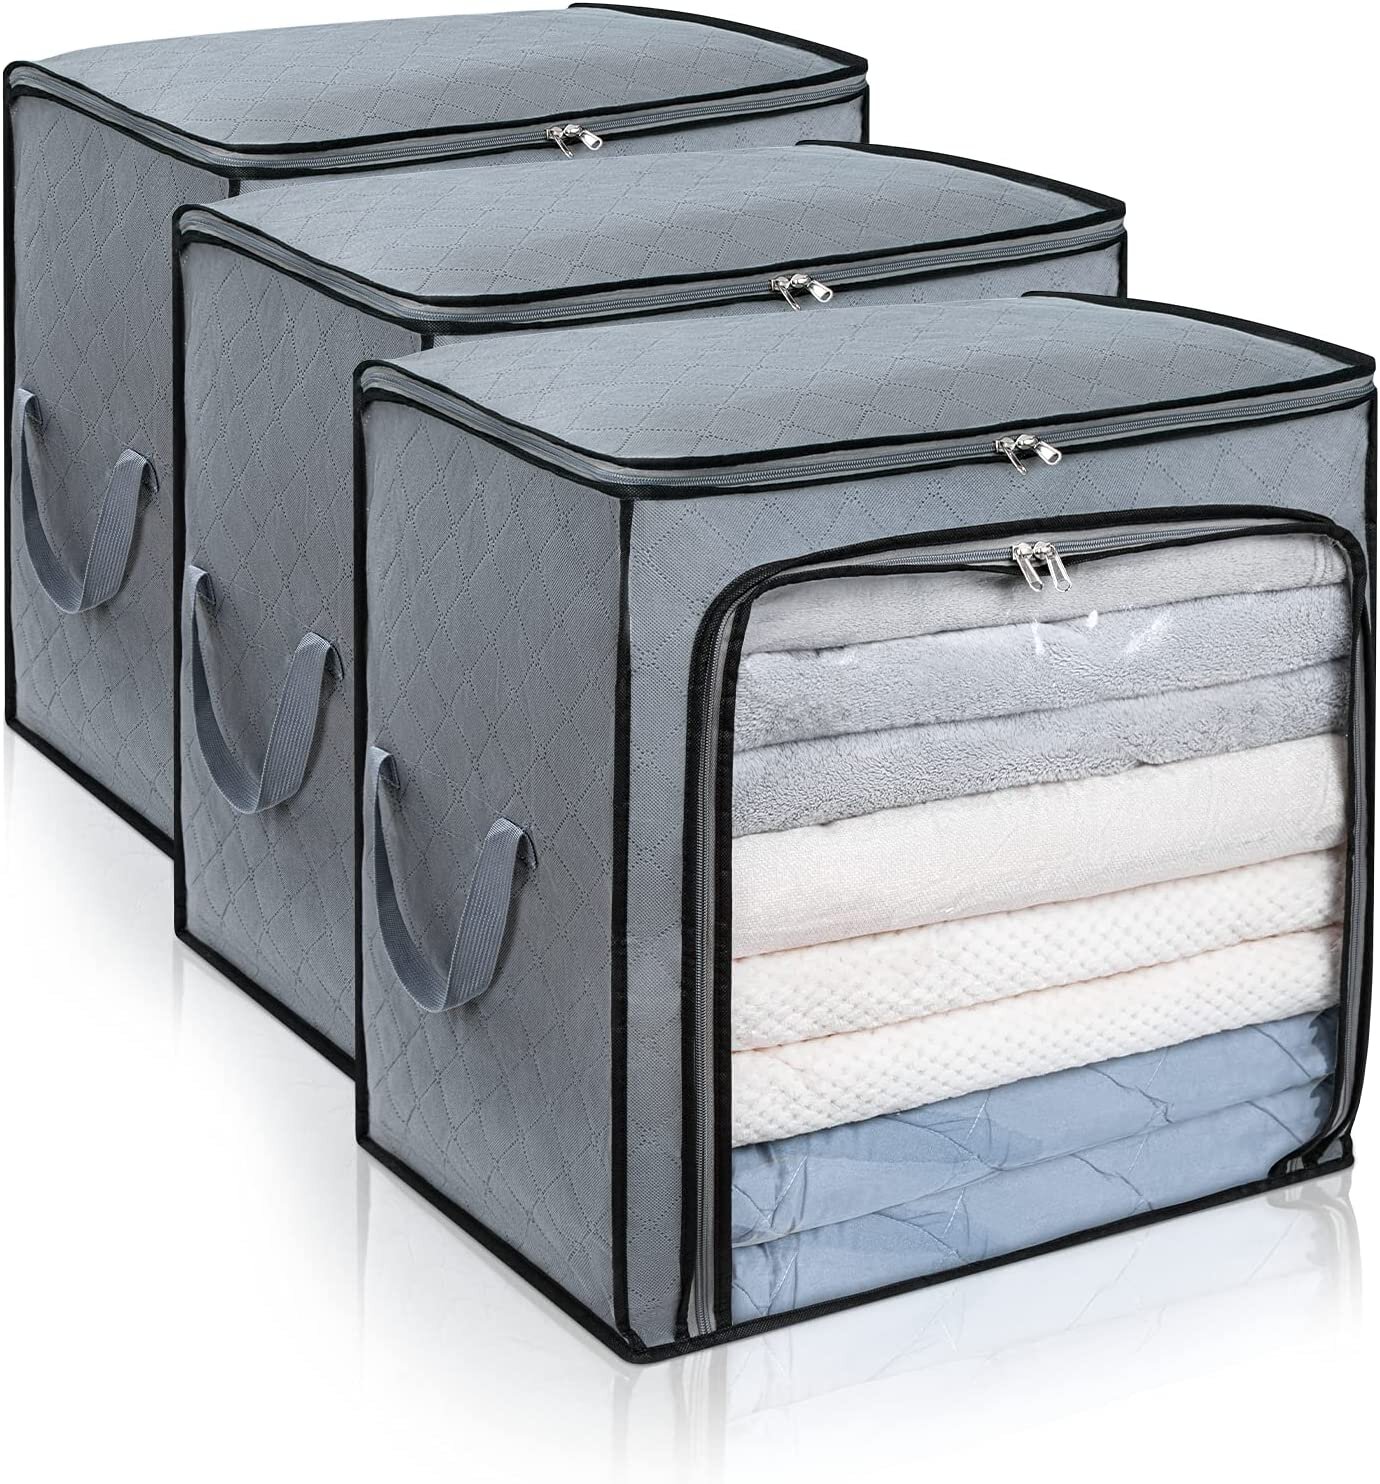 Organize Your Closet With These $20 Fabric Storage Bags